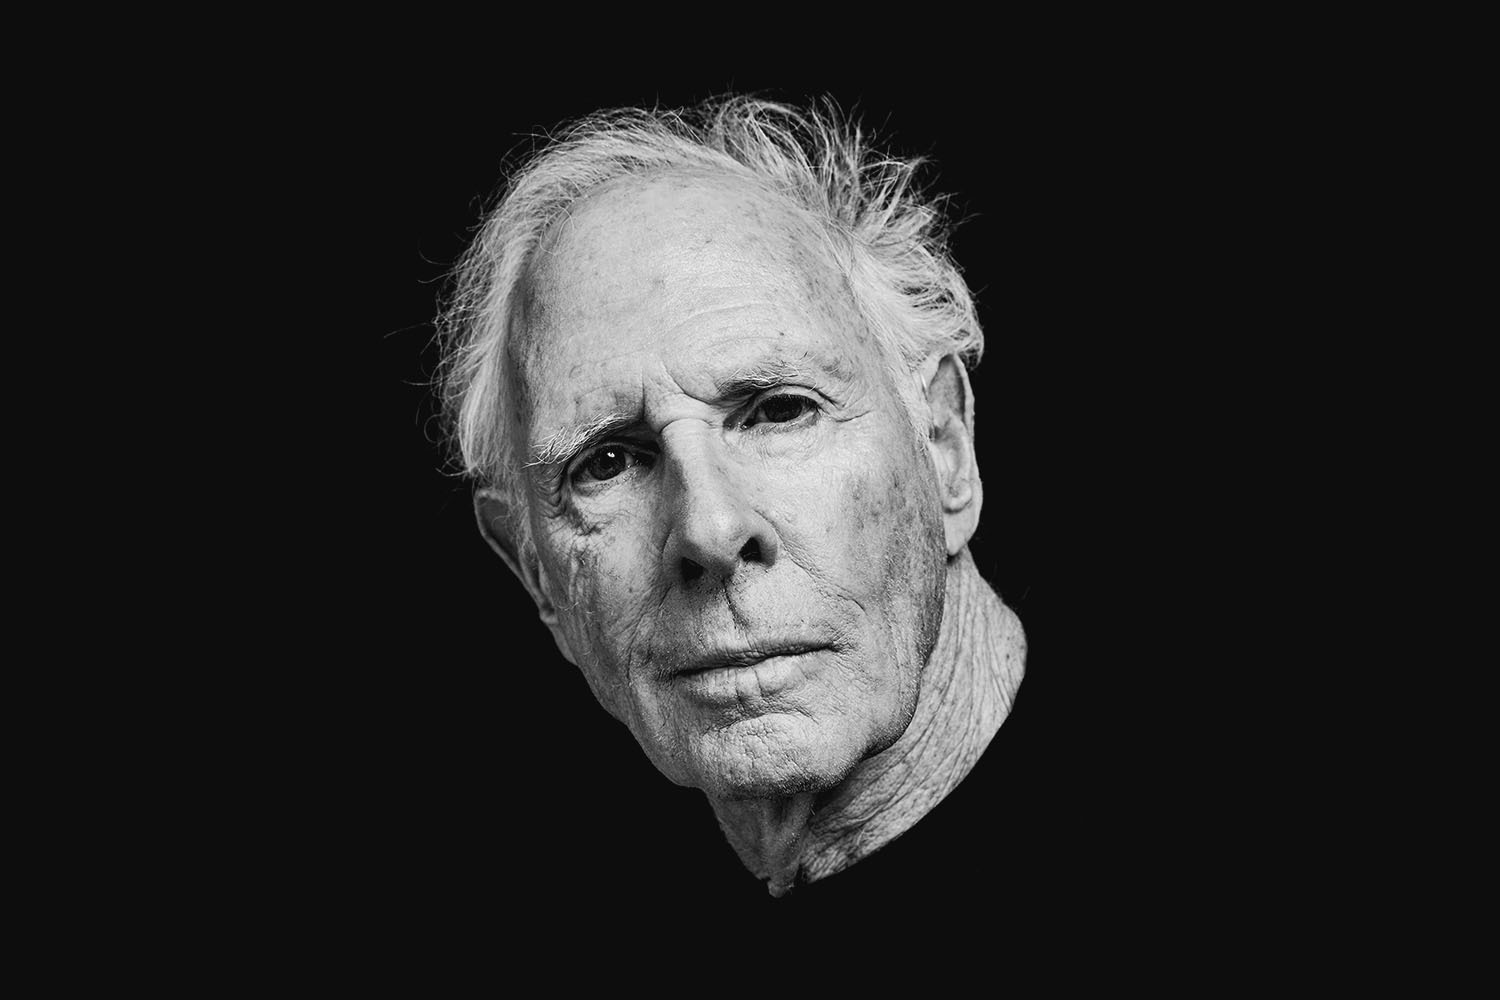 Bruce Dern returns to the small screen this month in “Goliath.”